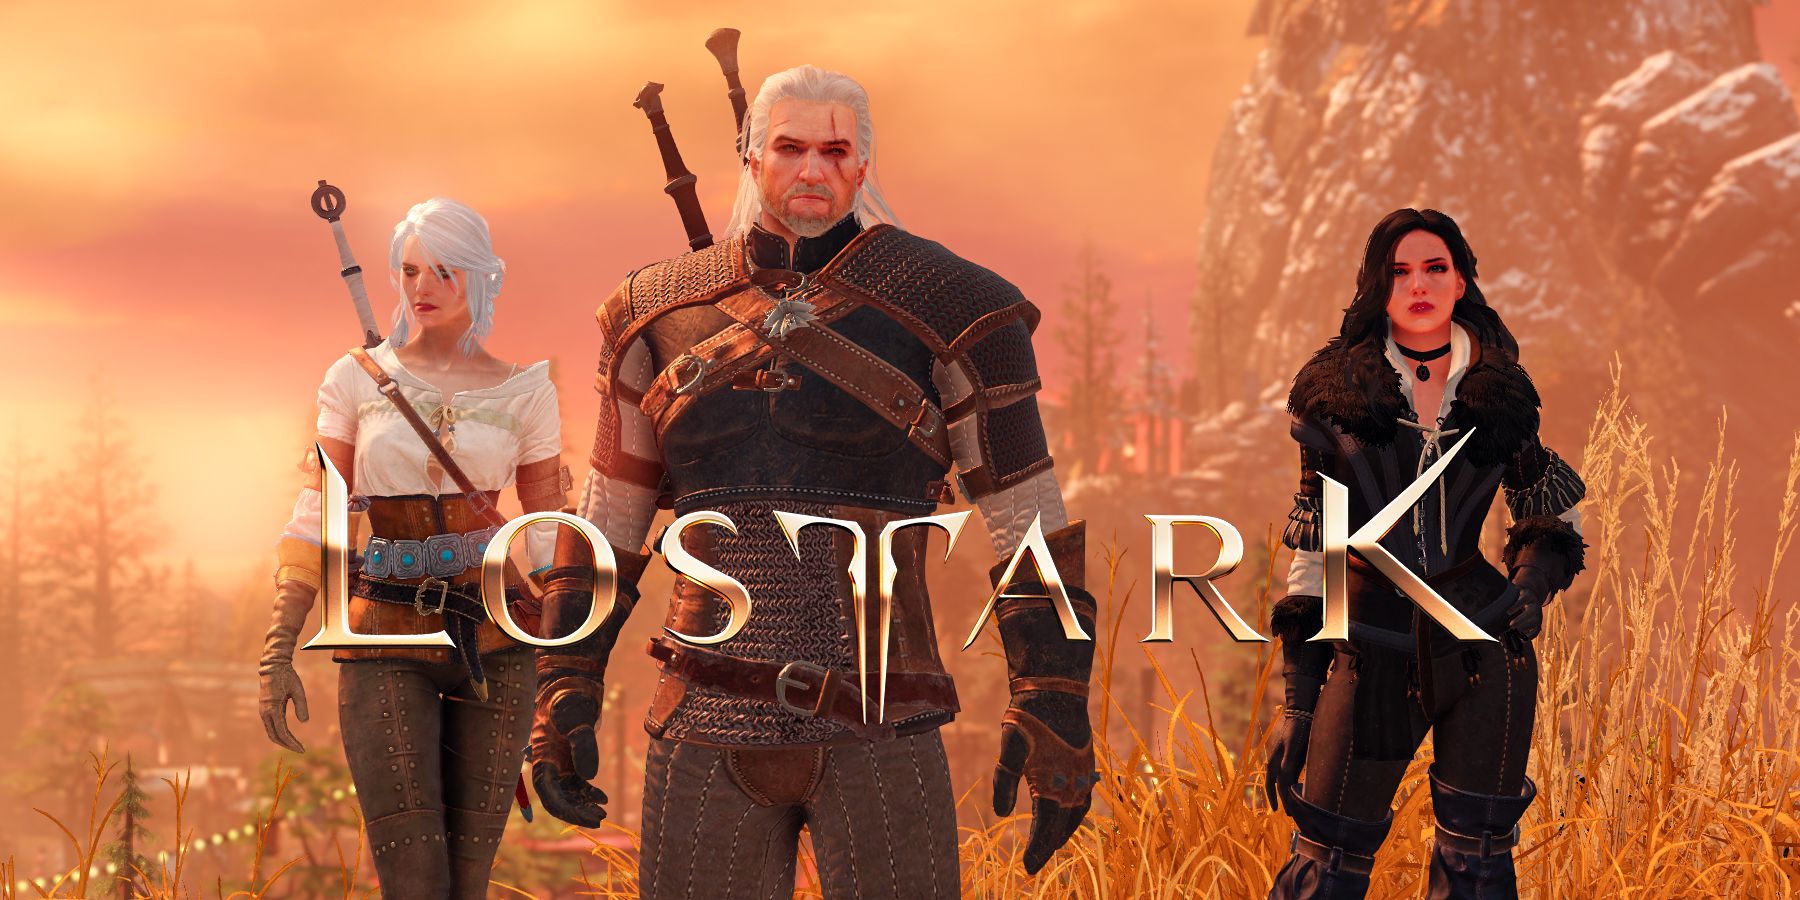 Lost Ark Witcher crossover Ciri Geralt and Yennefer